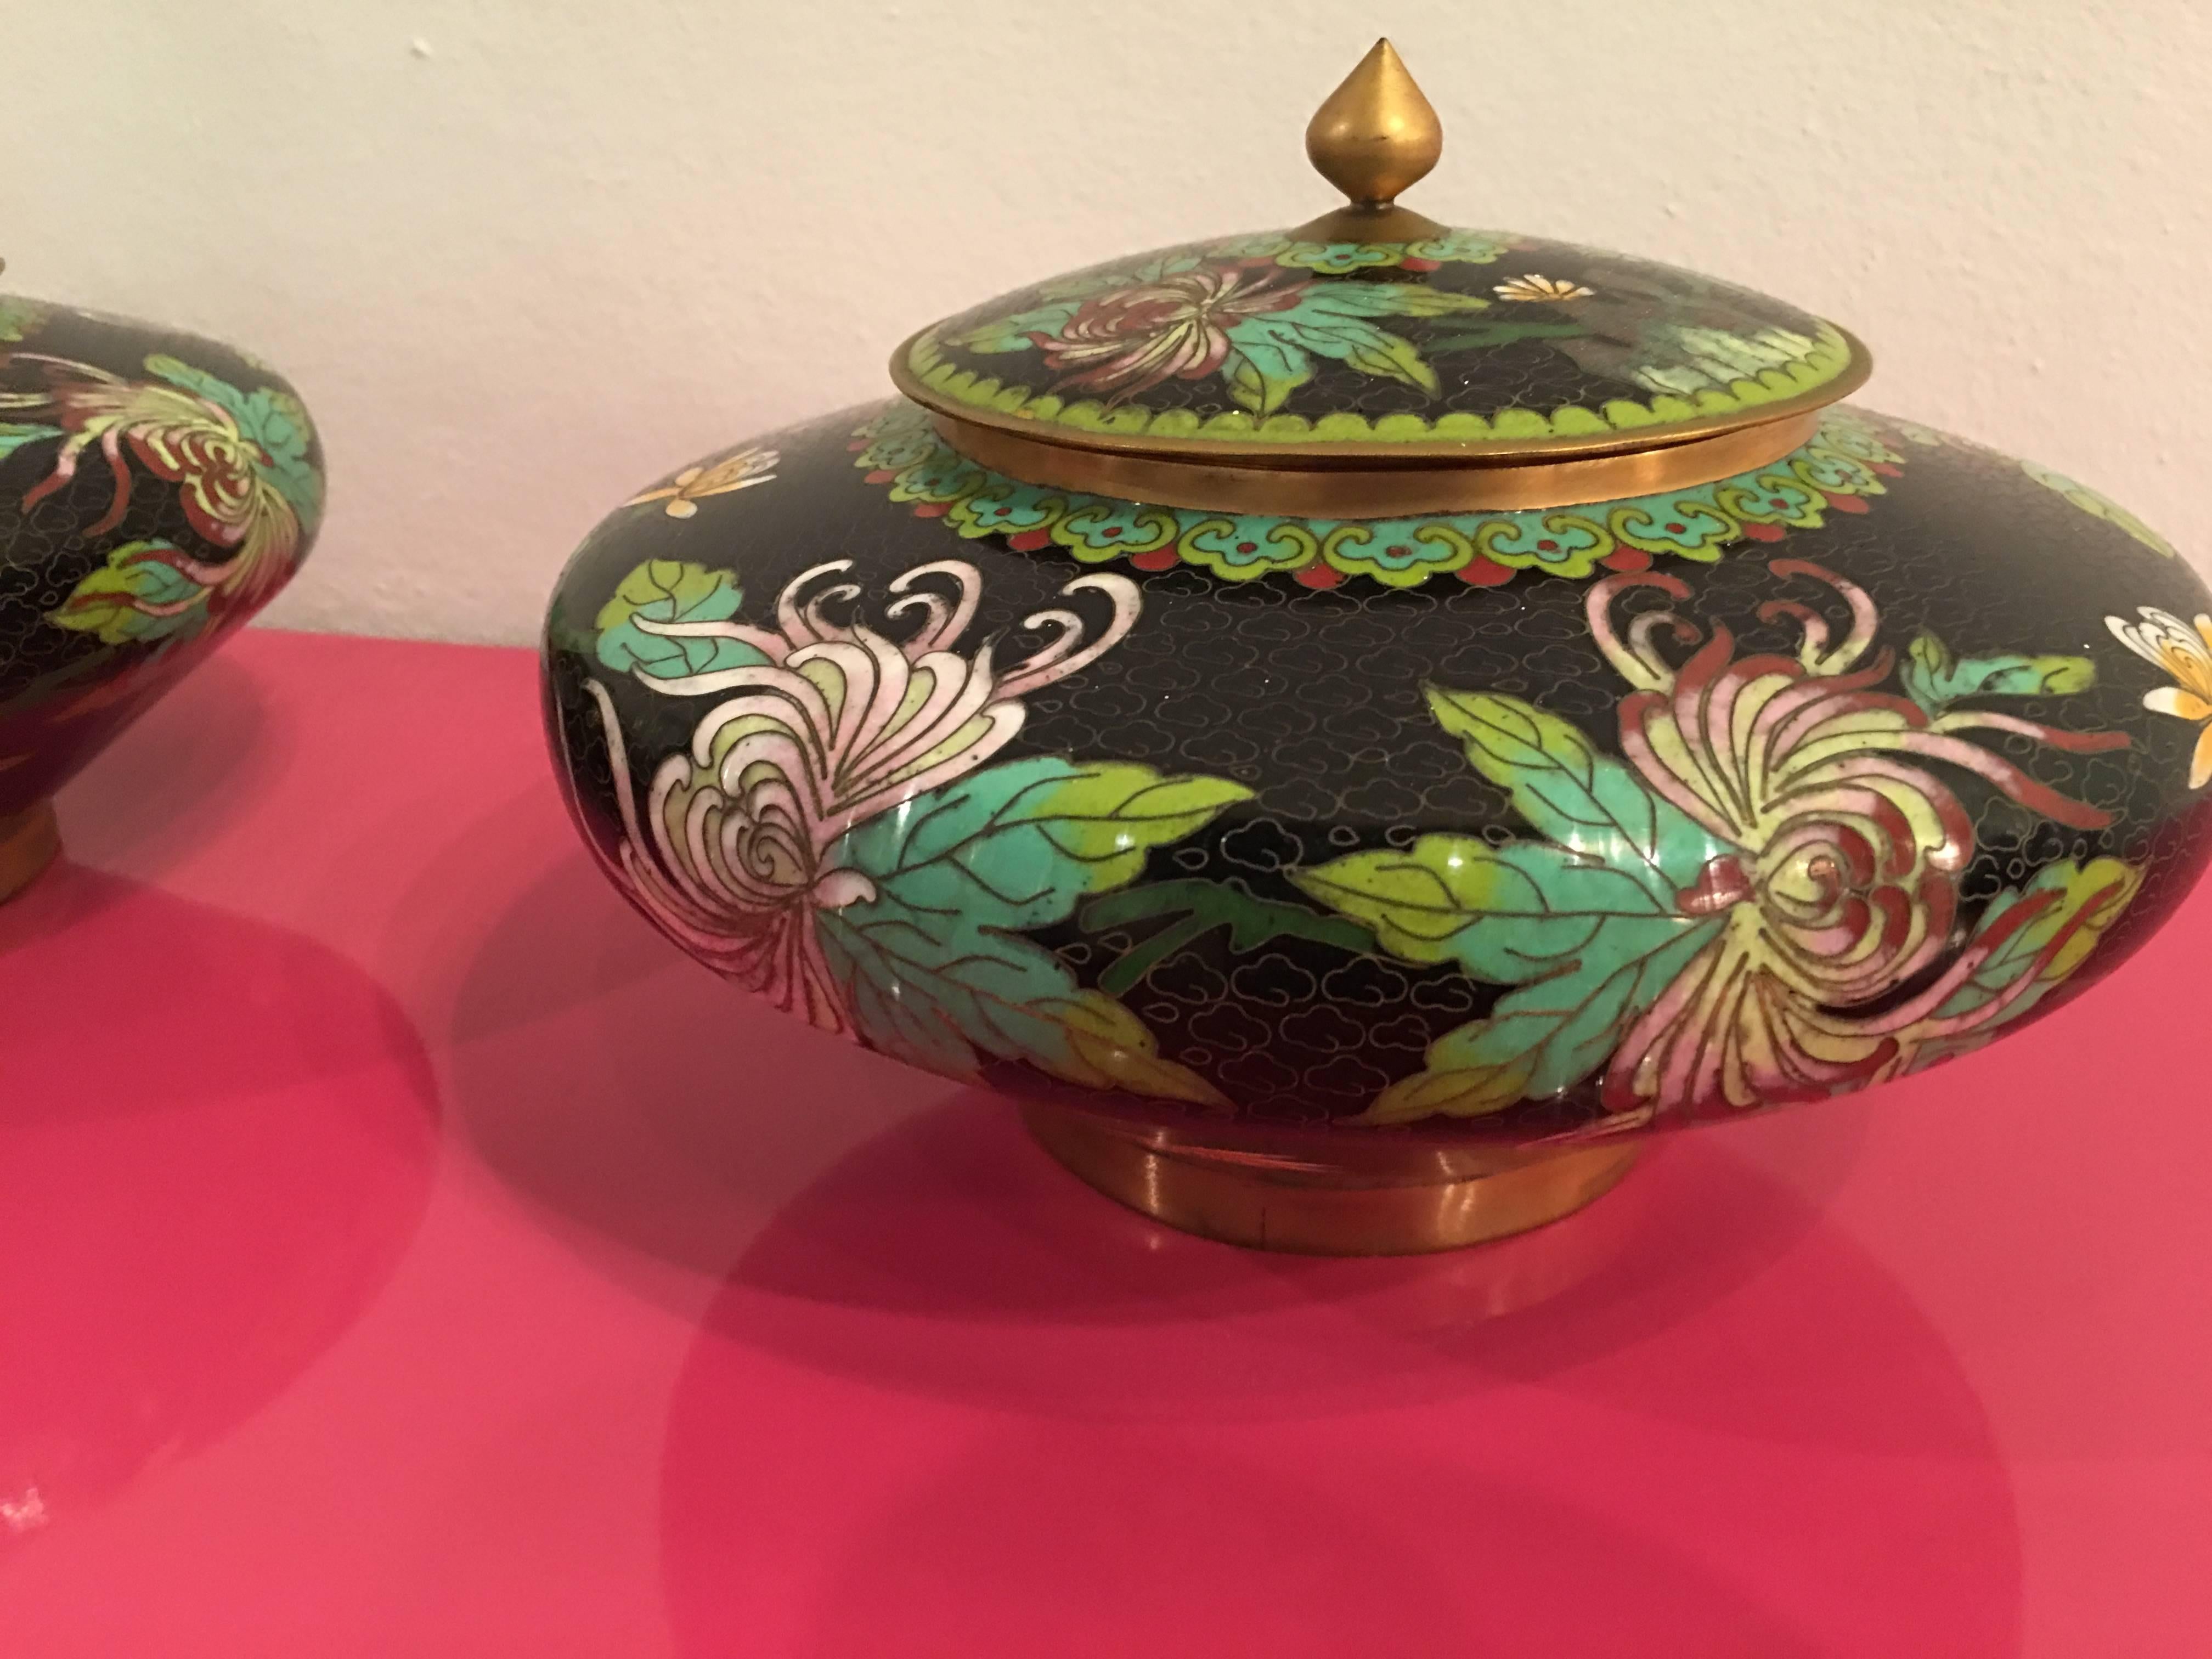 cloisonne urn with lid